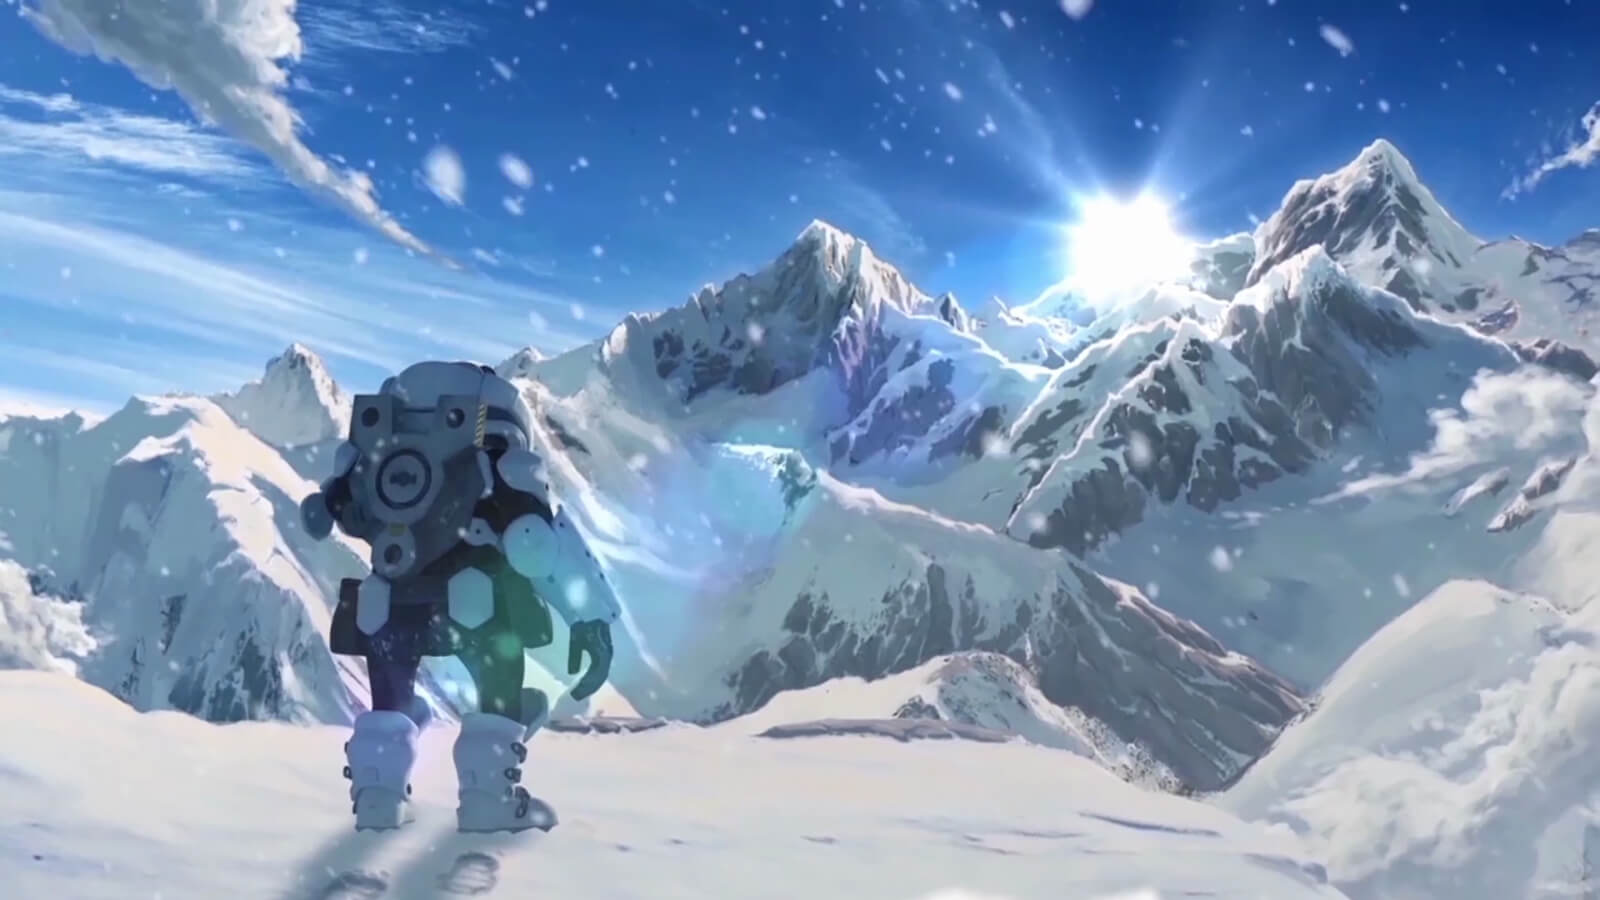 A man wearing futuristic armor stands on a snowy mountain top, looking at the sun rising over even higher peaks